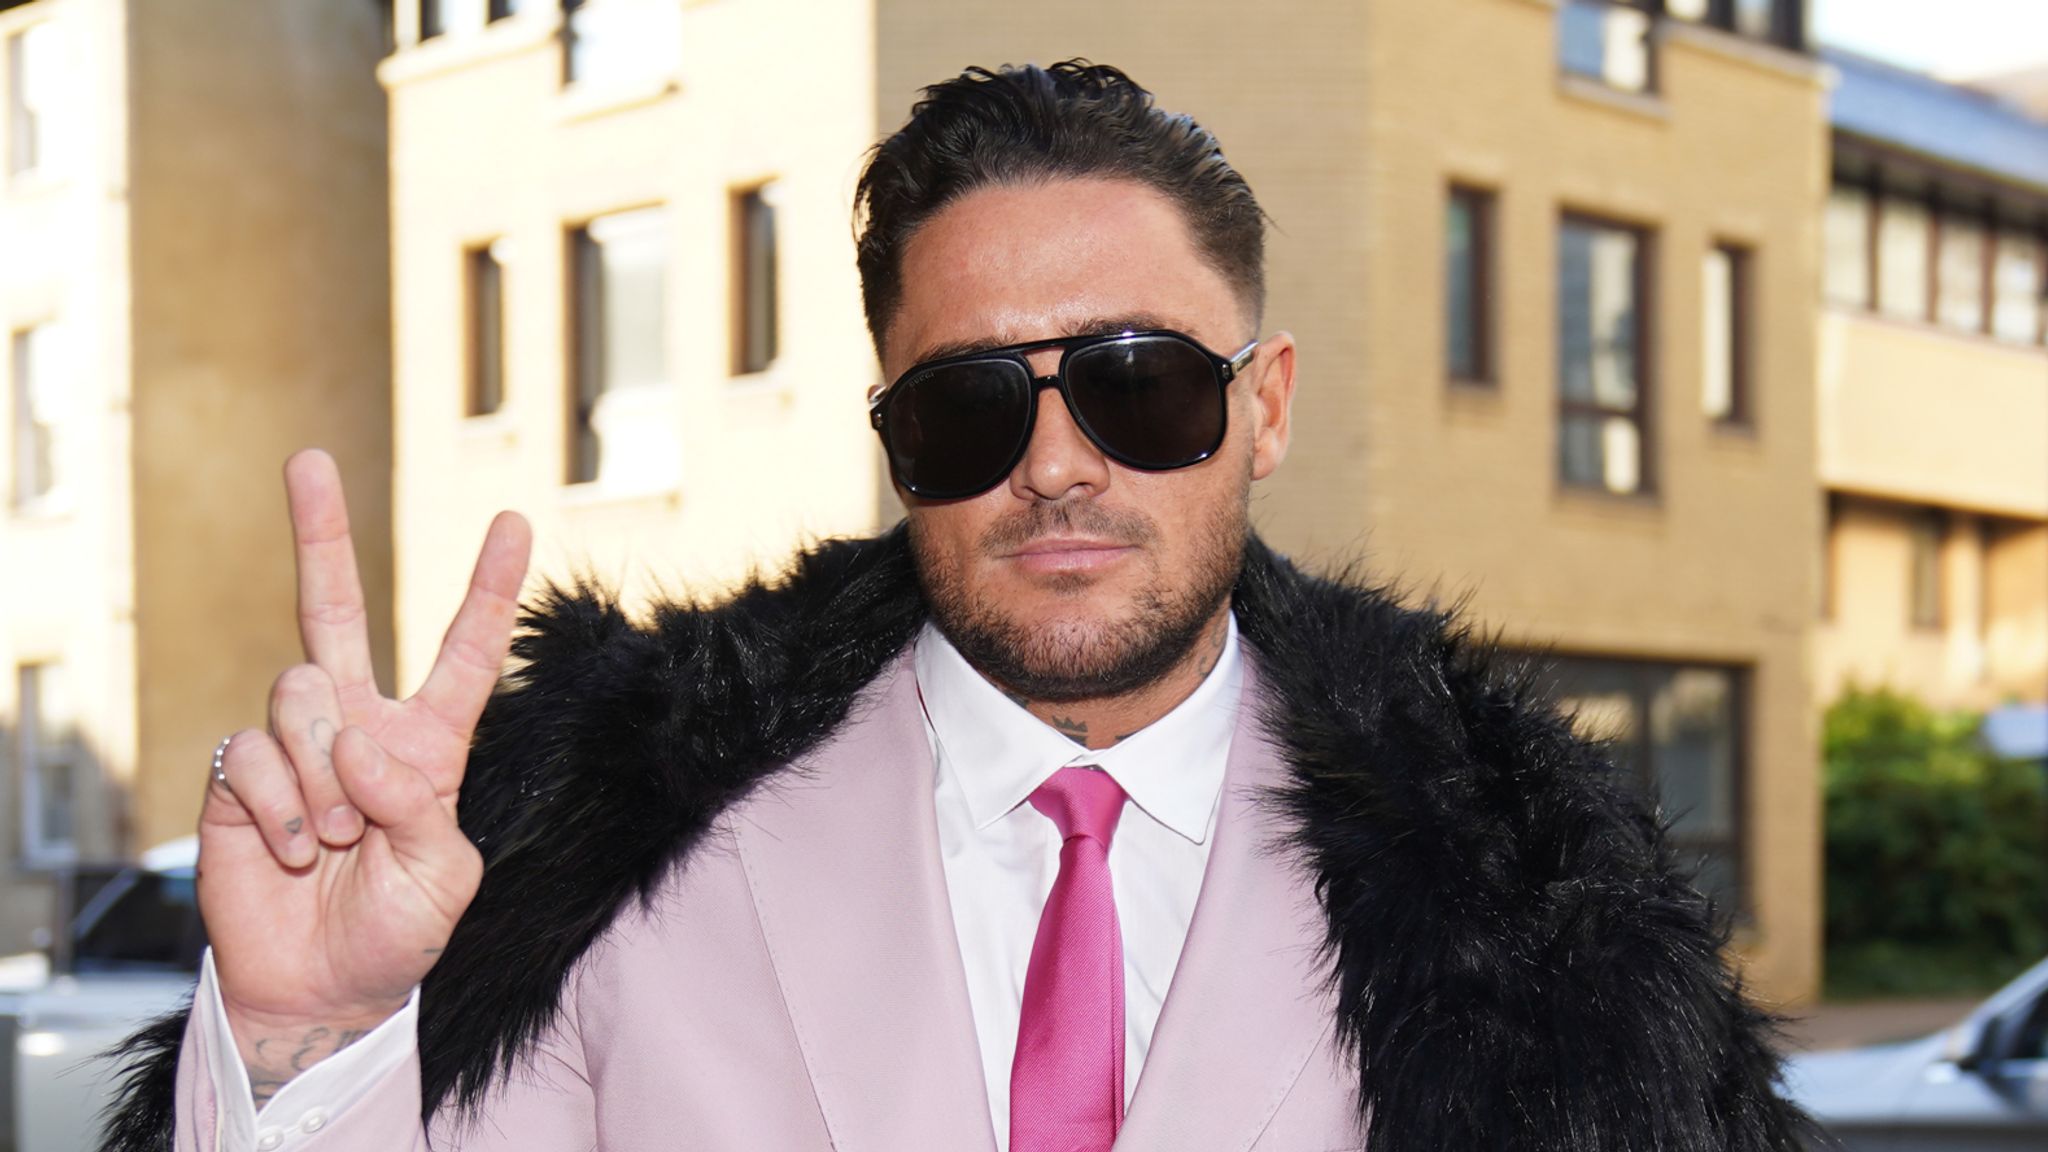 Stephen Bear Reality TV star on trial accused of sharing garden sex tape on OnlyFans Ents and Arts News Sky News